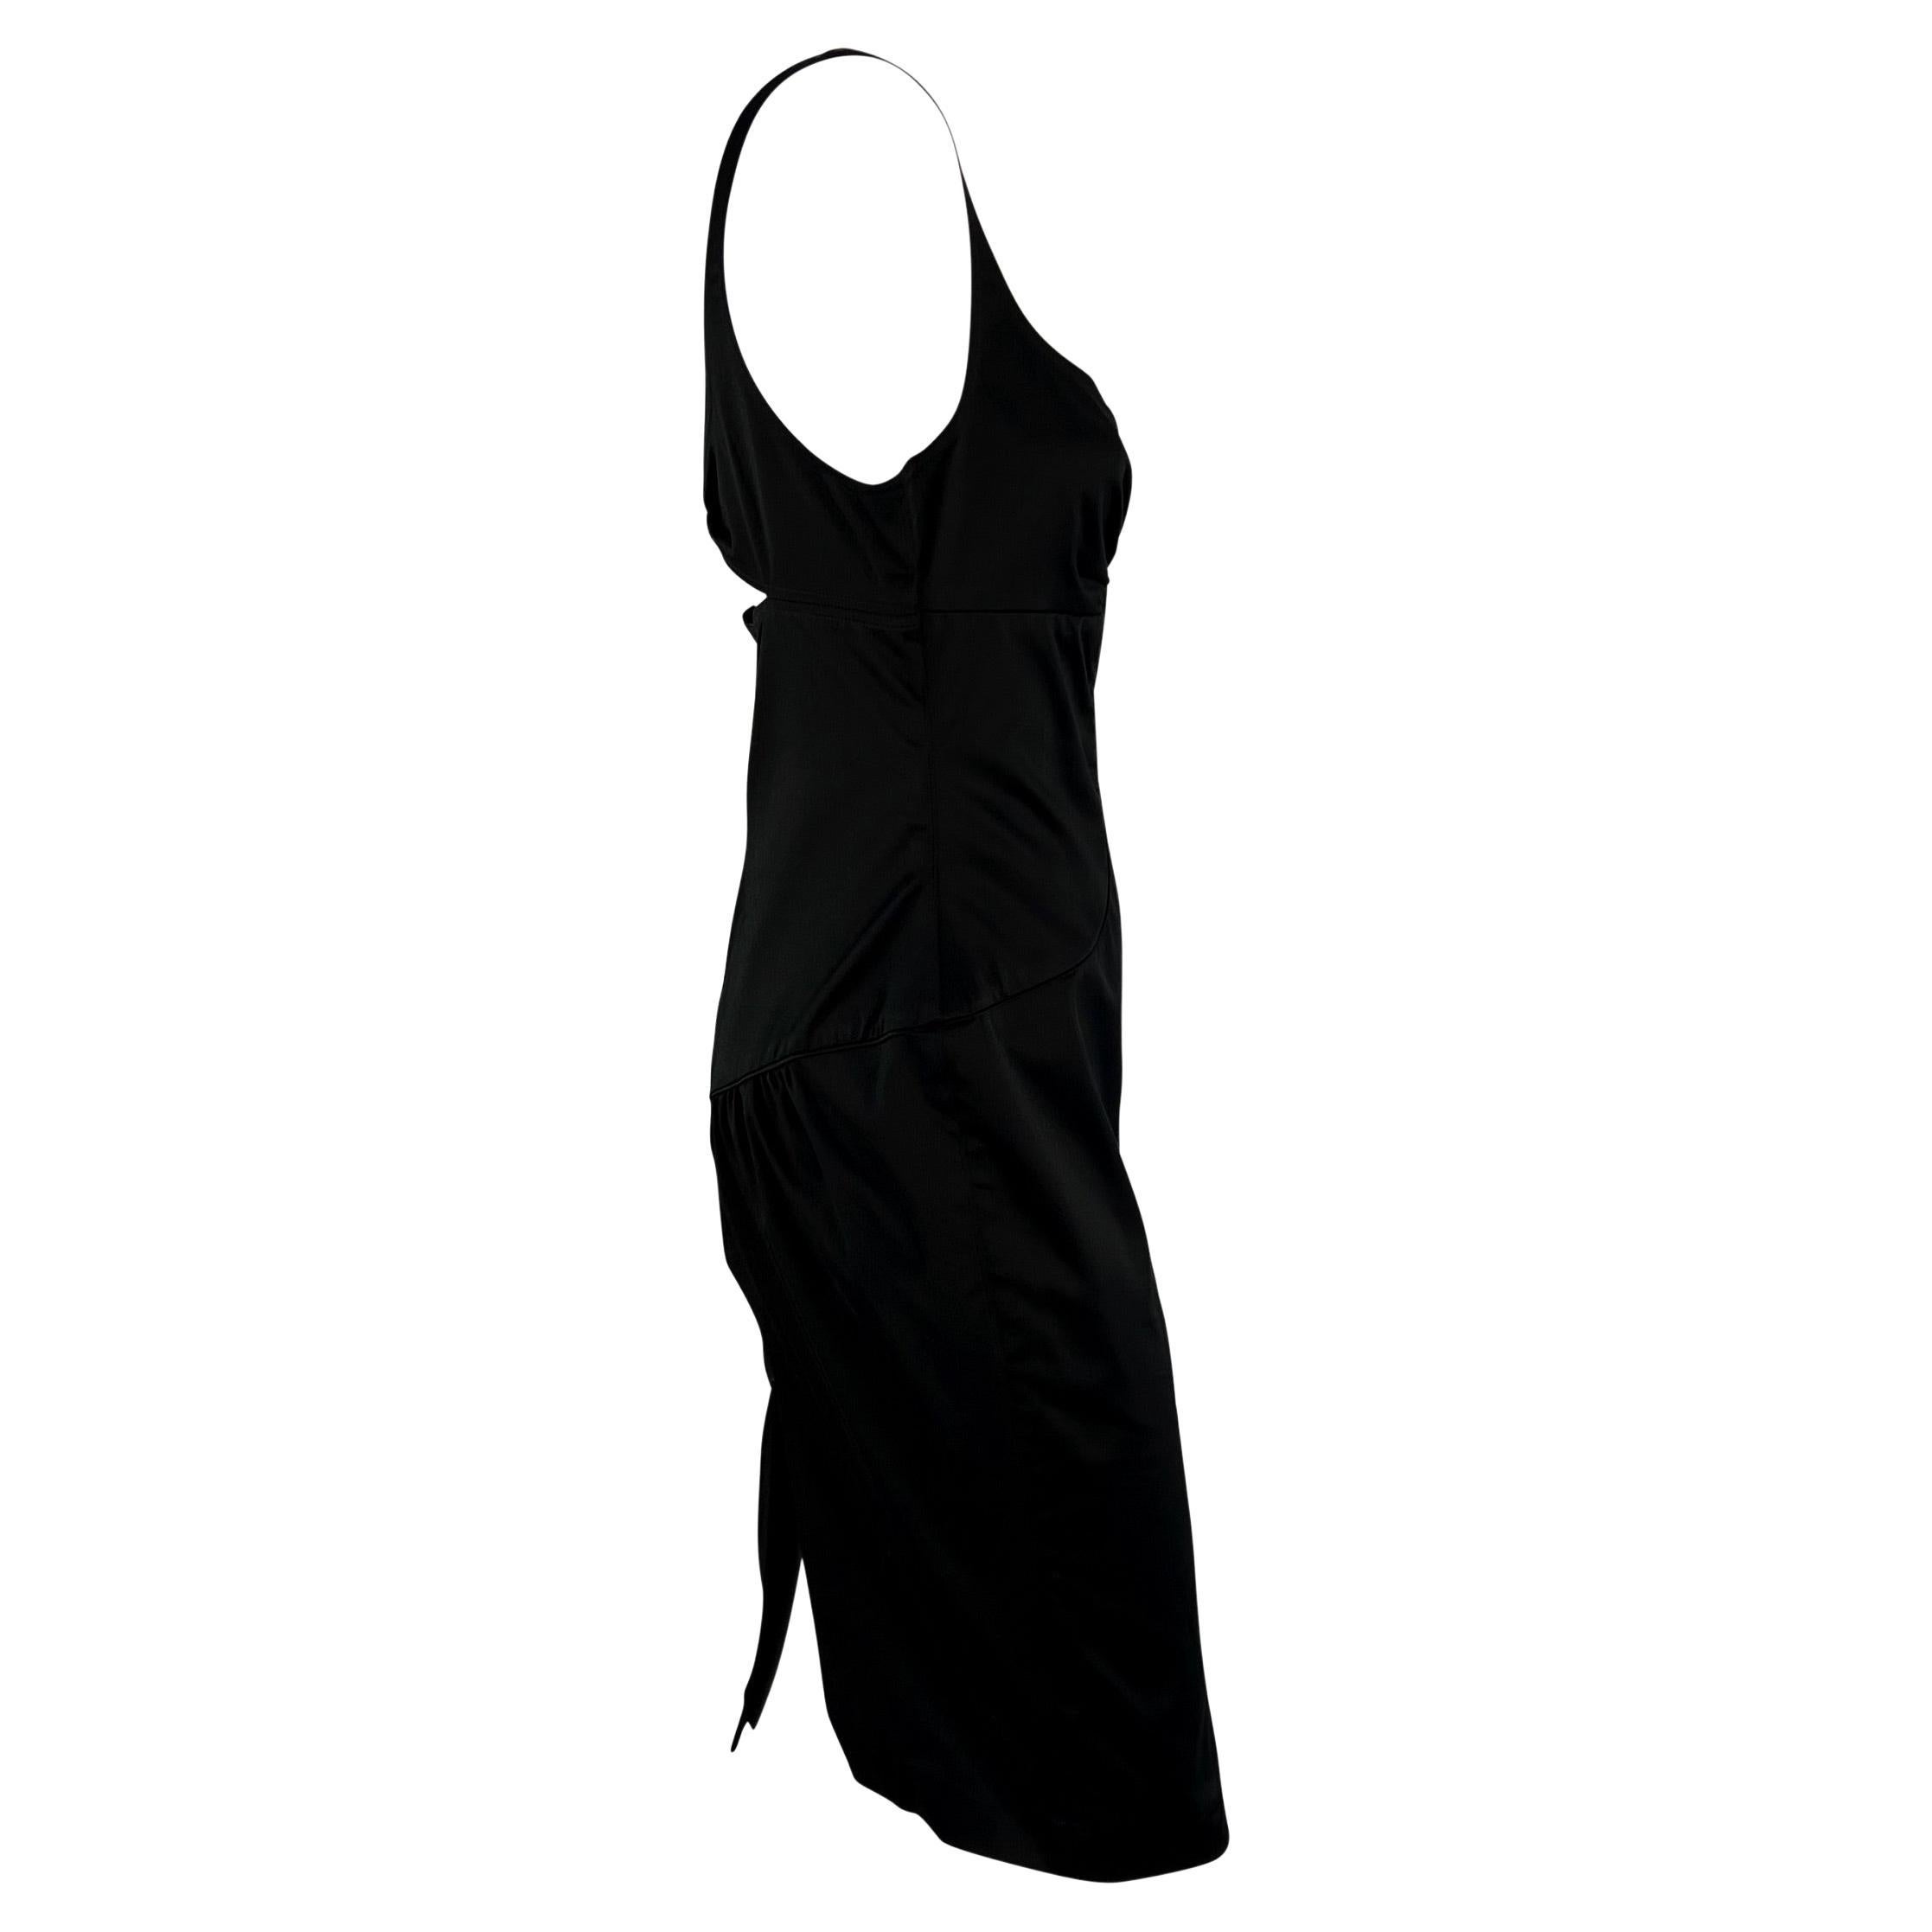 2003 Gucci by Tom Ford Back Tie Black Sleeveless Cutout Dress  3